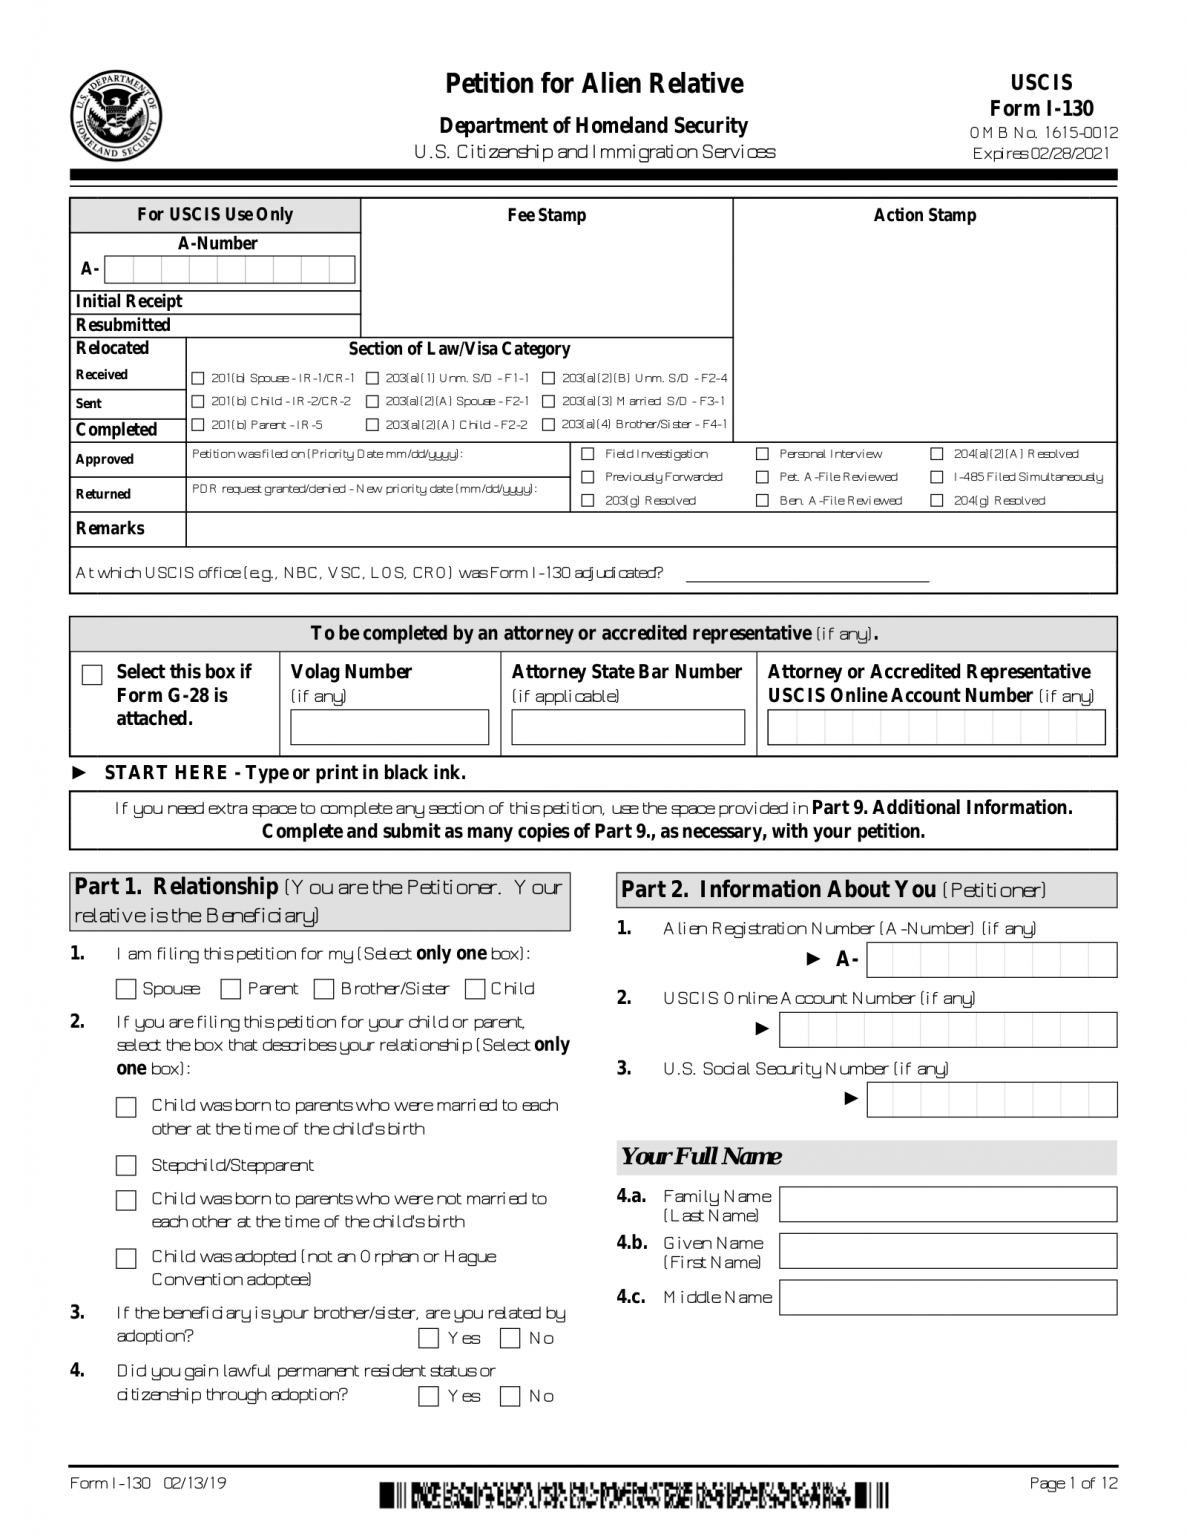 free-uscis-form-i-130-petition-for-alien-relative-pdf-eforms